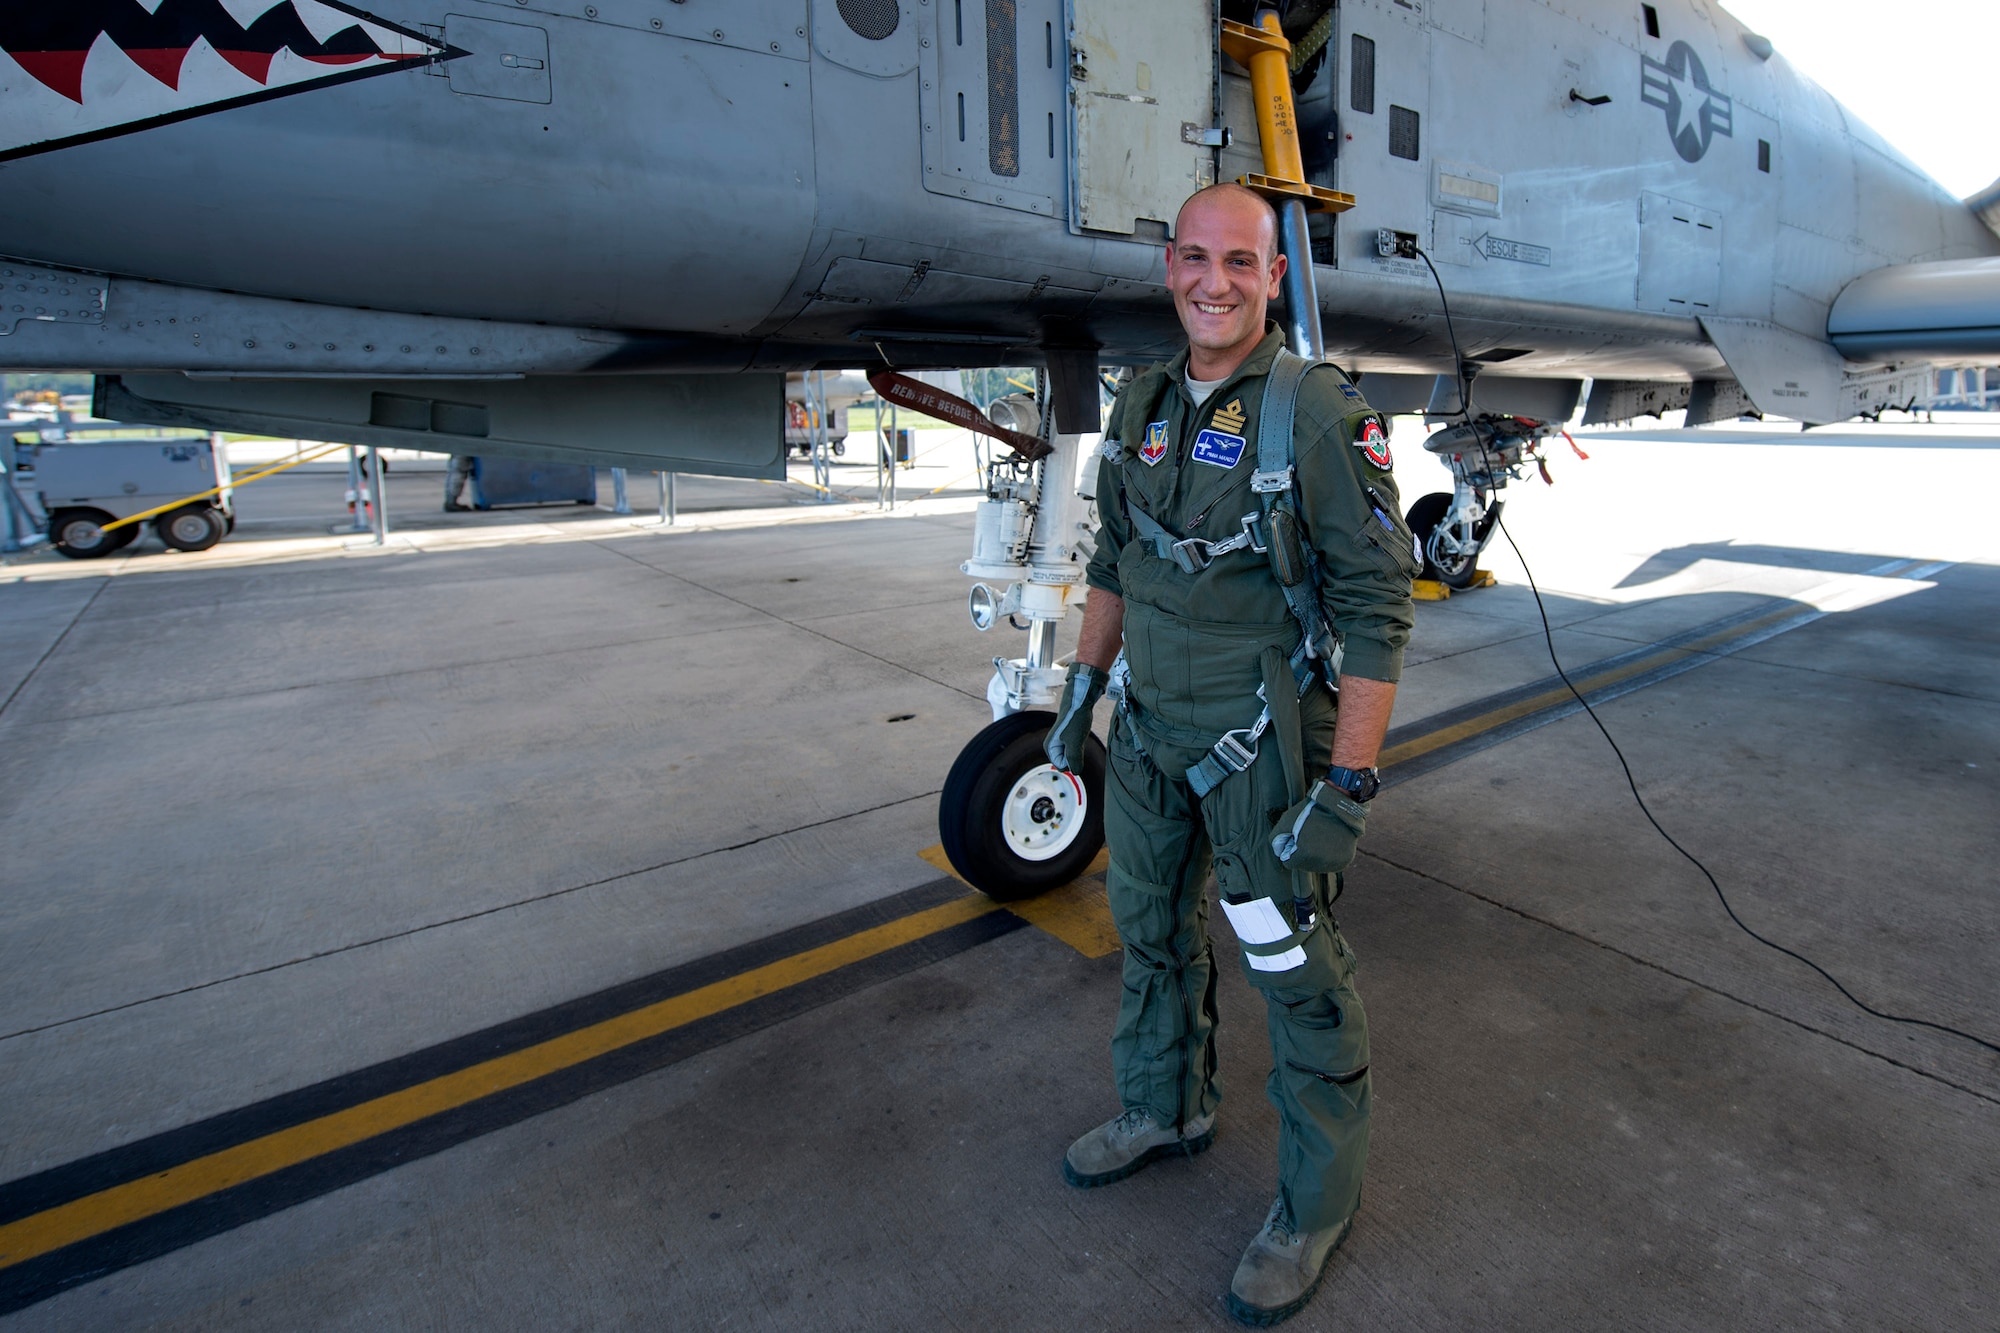 Italian exchange pilot Roberto Manzo, 74th Fighter Squadron training assistant, poses for a photo before flying, Aug. 25, 2016, at Moody Air Force Base, Ga. Manzo was raised in Rome, Italy and developed a desire to become a pilot after seeing jets fly for the first time. (U.S. Air Force photo by Airman 1st Class Janiqua P. Robinson)